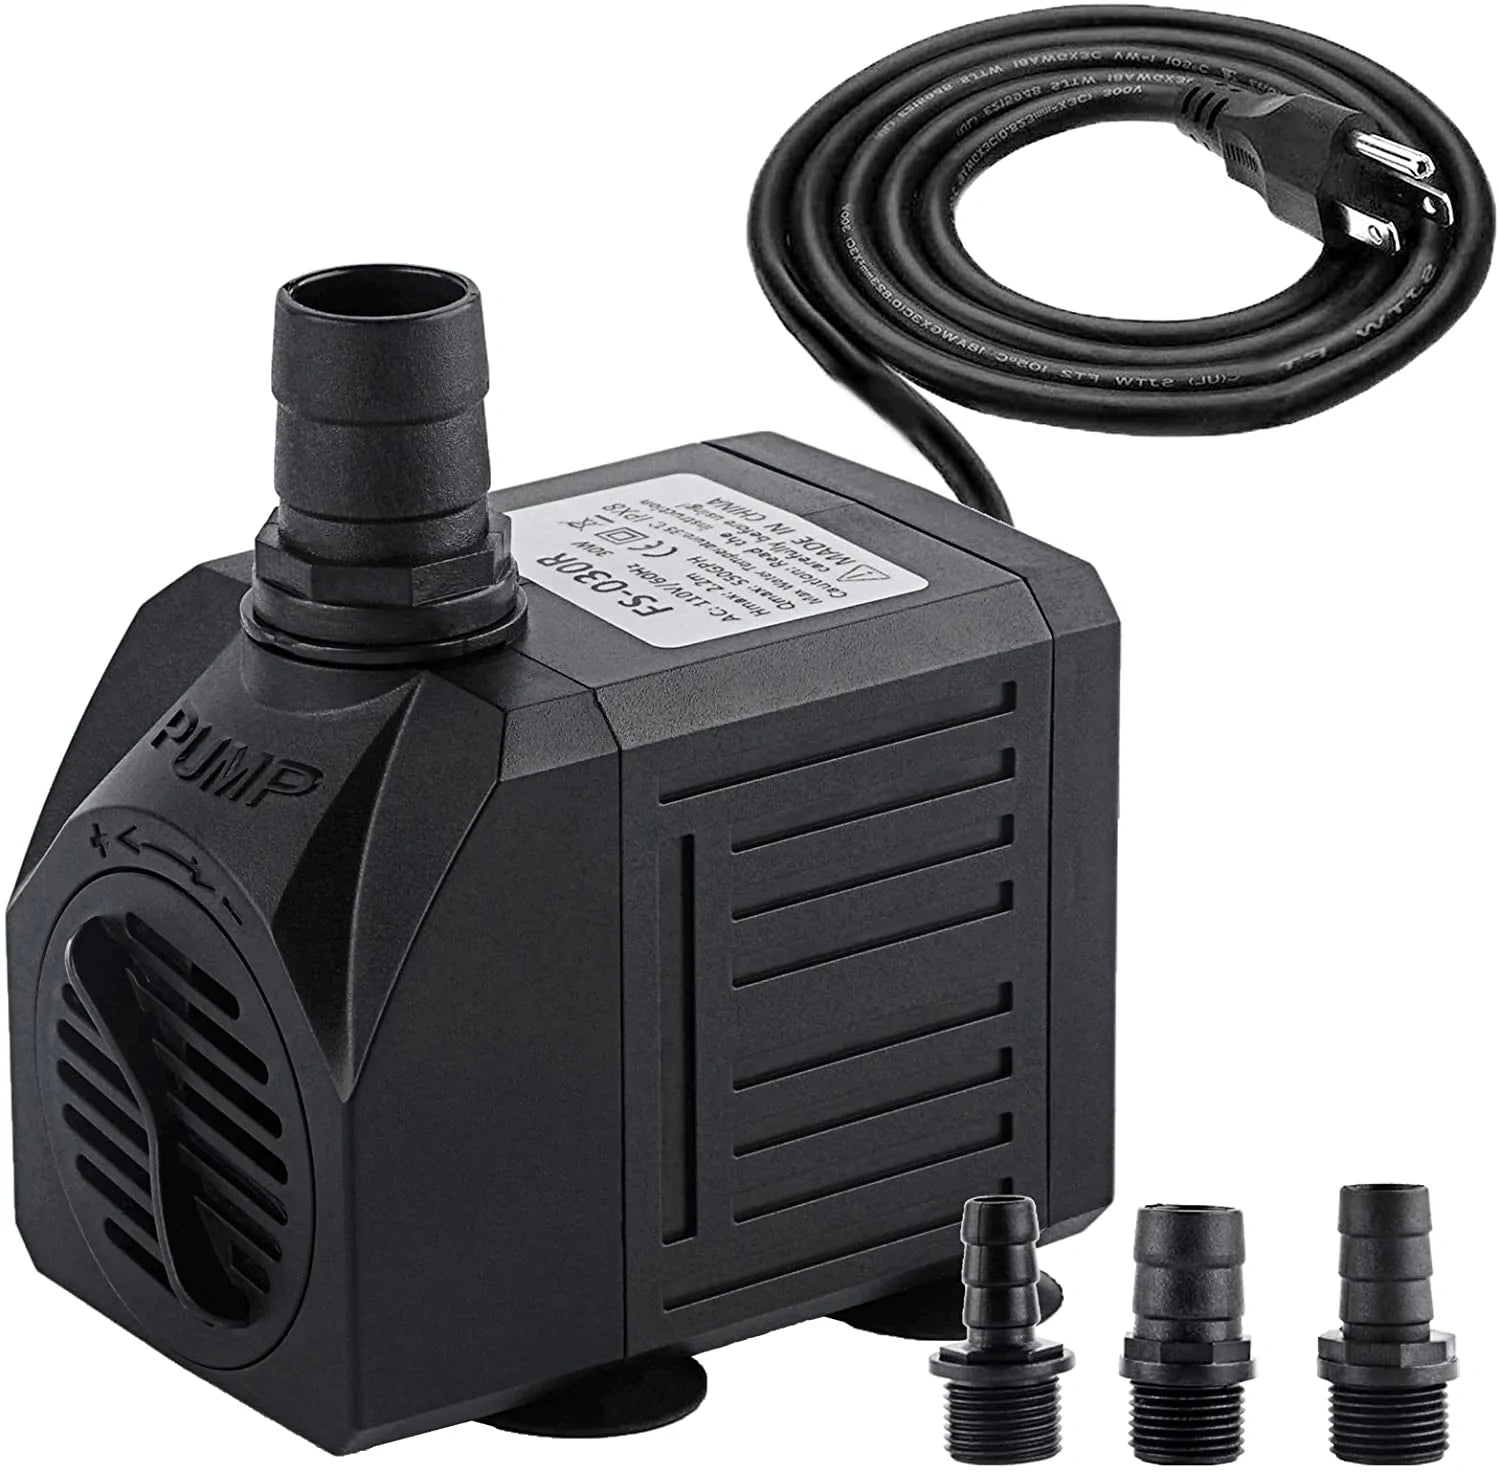 Yochaqute Aquarium Submersible Water Pump: 550GPH 30W Quiet Mini Adjustable with 6Ft Power Cord for Hydroponics | Garden Waterfall | Pond | Fish Tank | Fountain